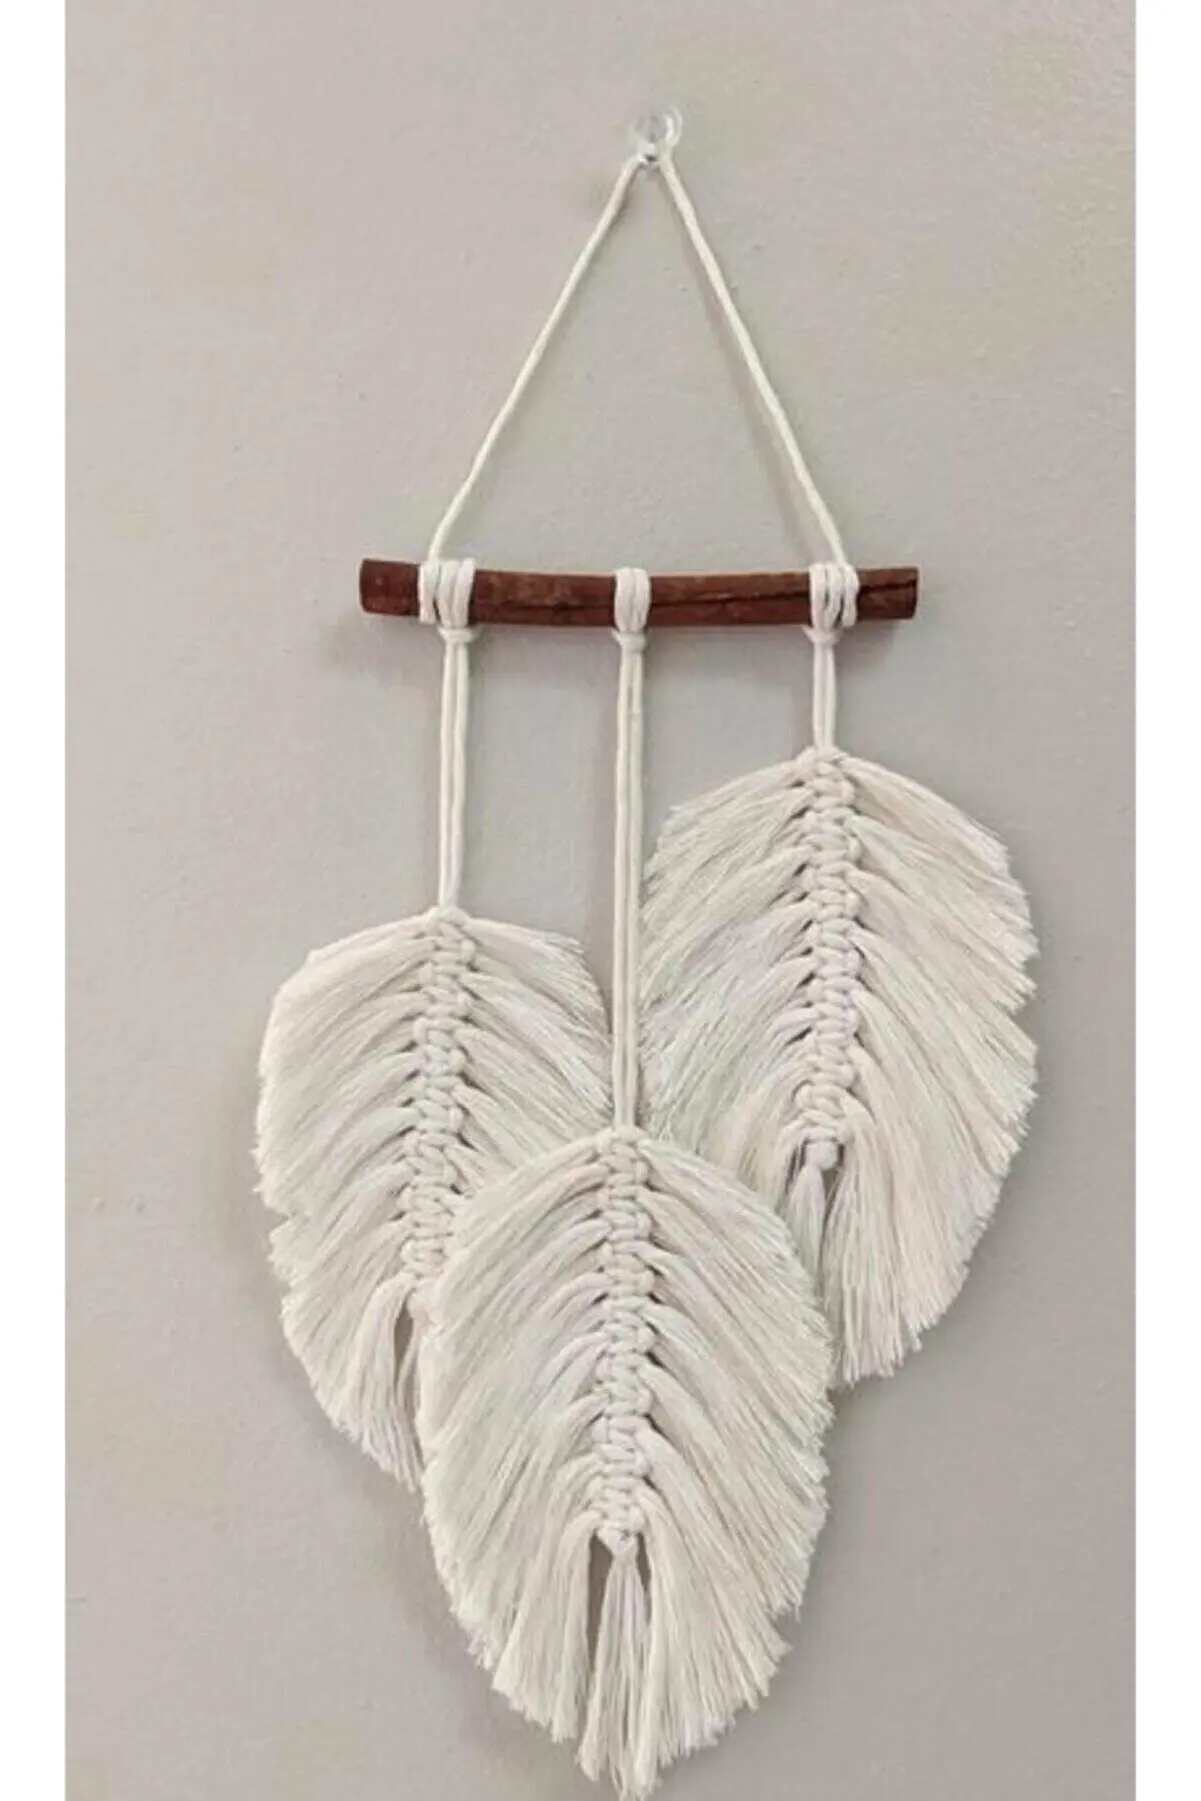 

Handmade Macrame Leaves Wall Decor Hanging Cotton Living Room Wedding Decoration Home Party Tapestry Art Beautiful Countyard New